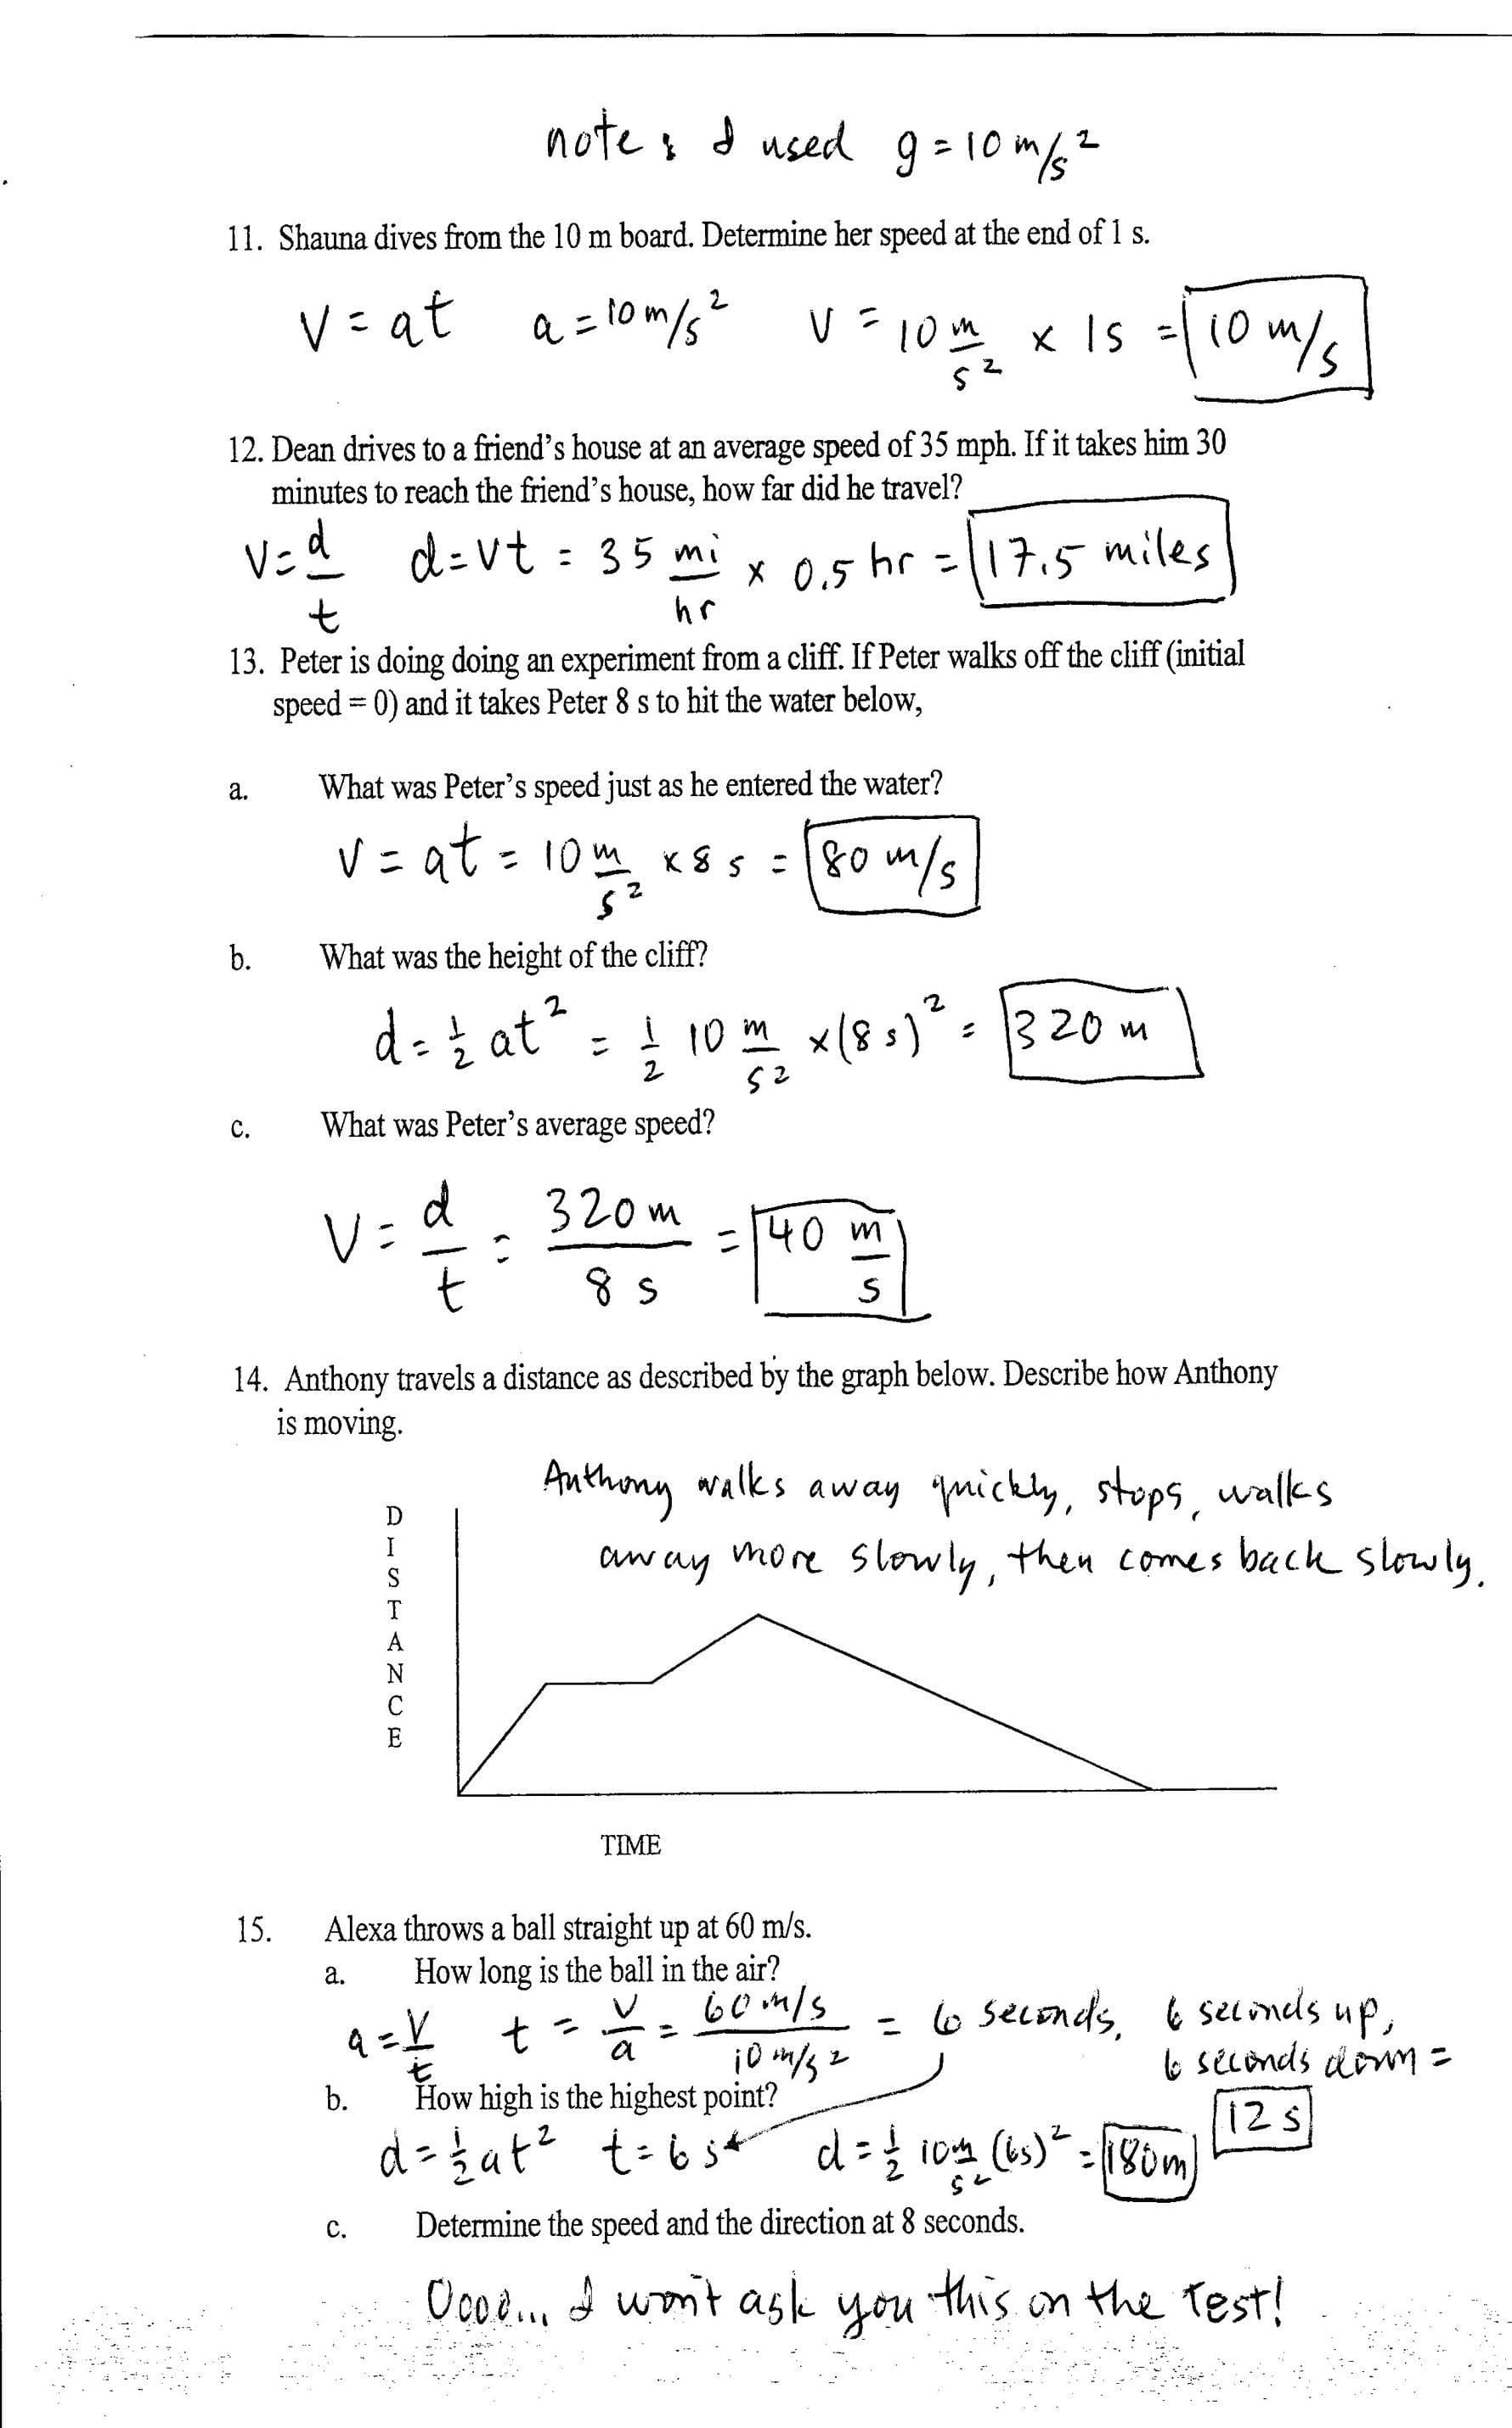 Stoichiometry Section 121 The Arithmetic Of Equations Worksheet For Stoichiometry Section 12 1 The Arithmetic Of Equations Worksheet Answers